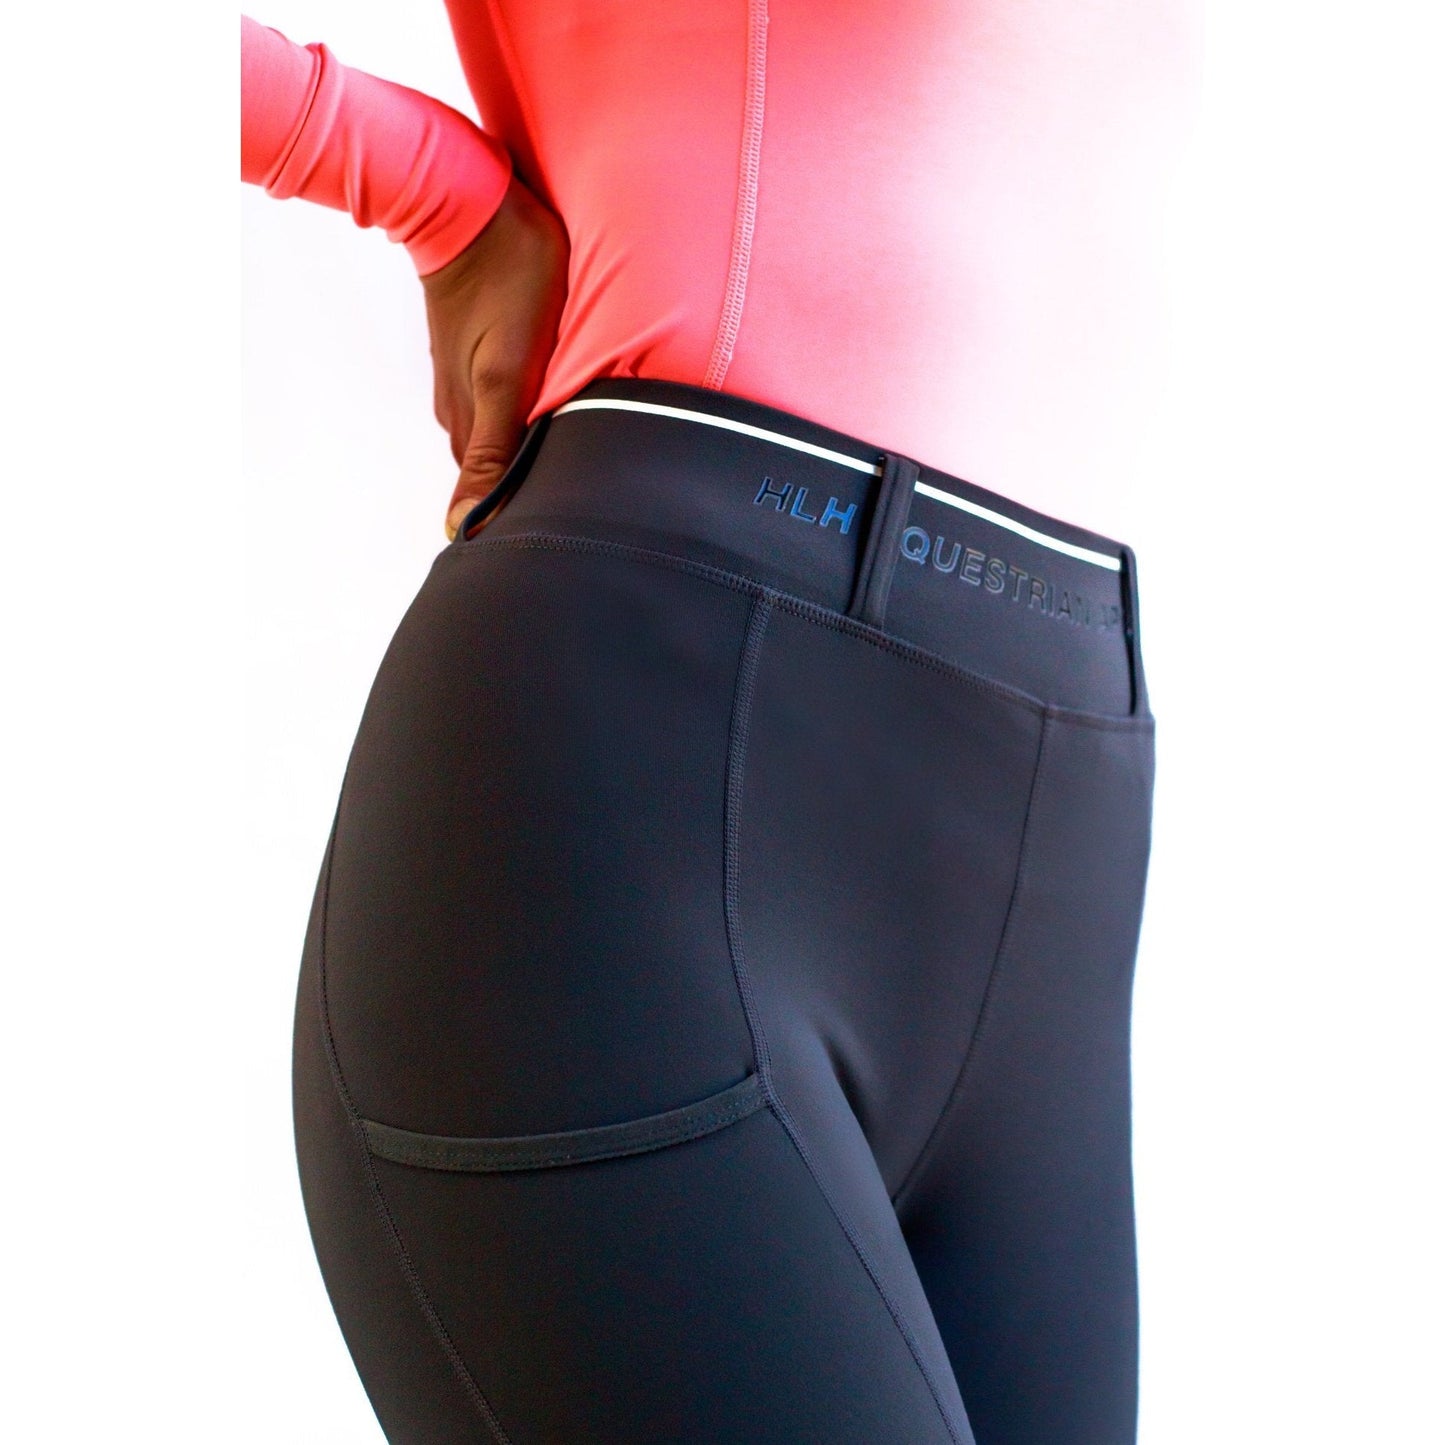 Person wearing black horse riding tights with branding on waistband.